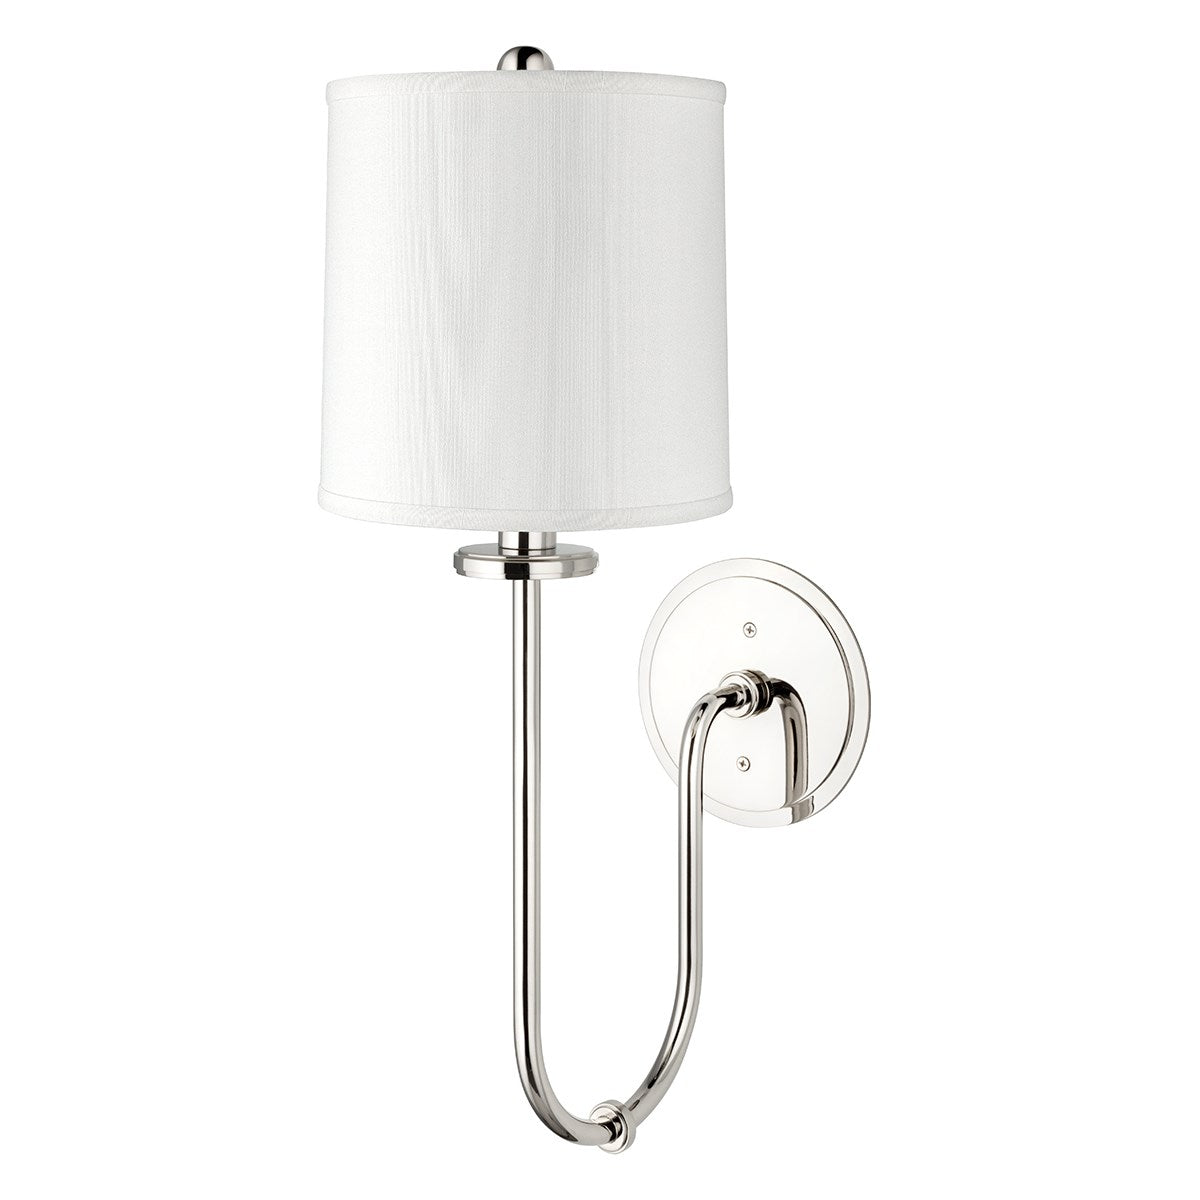 Jericho - 1 LIGHT WALL SCONCE Wall Light Fixtures Hudson Valley Polished Nickel  